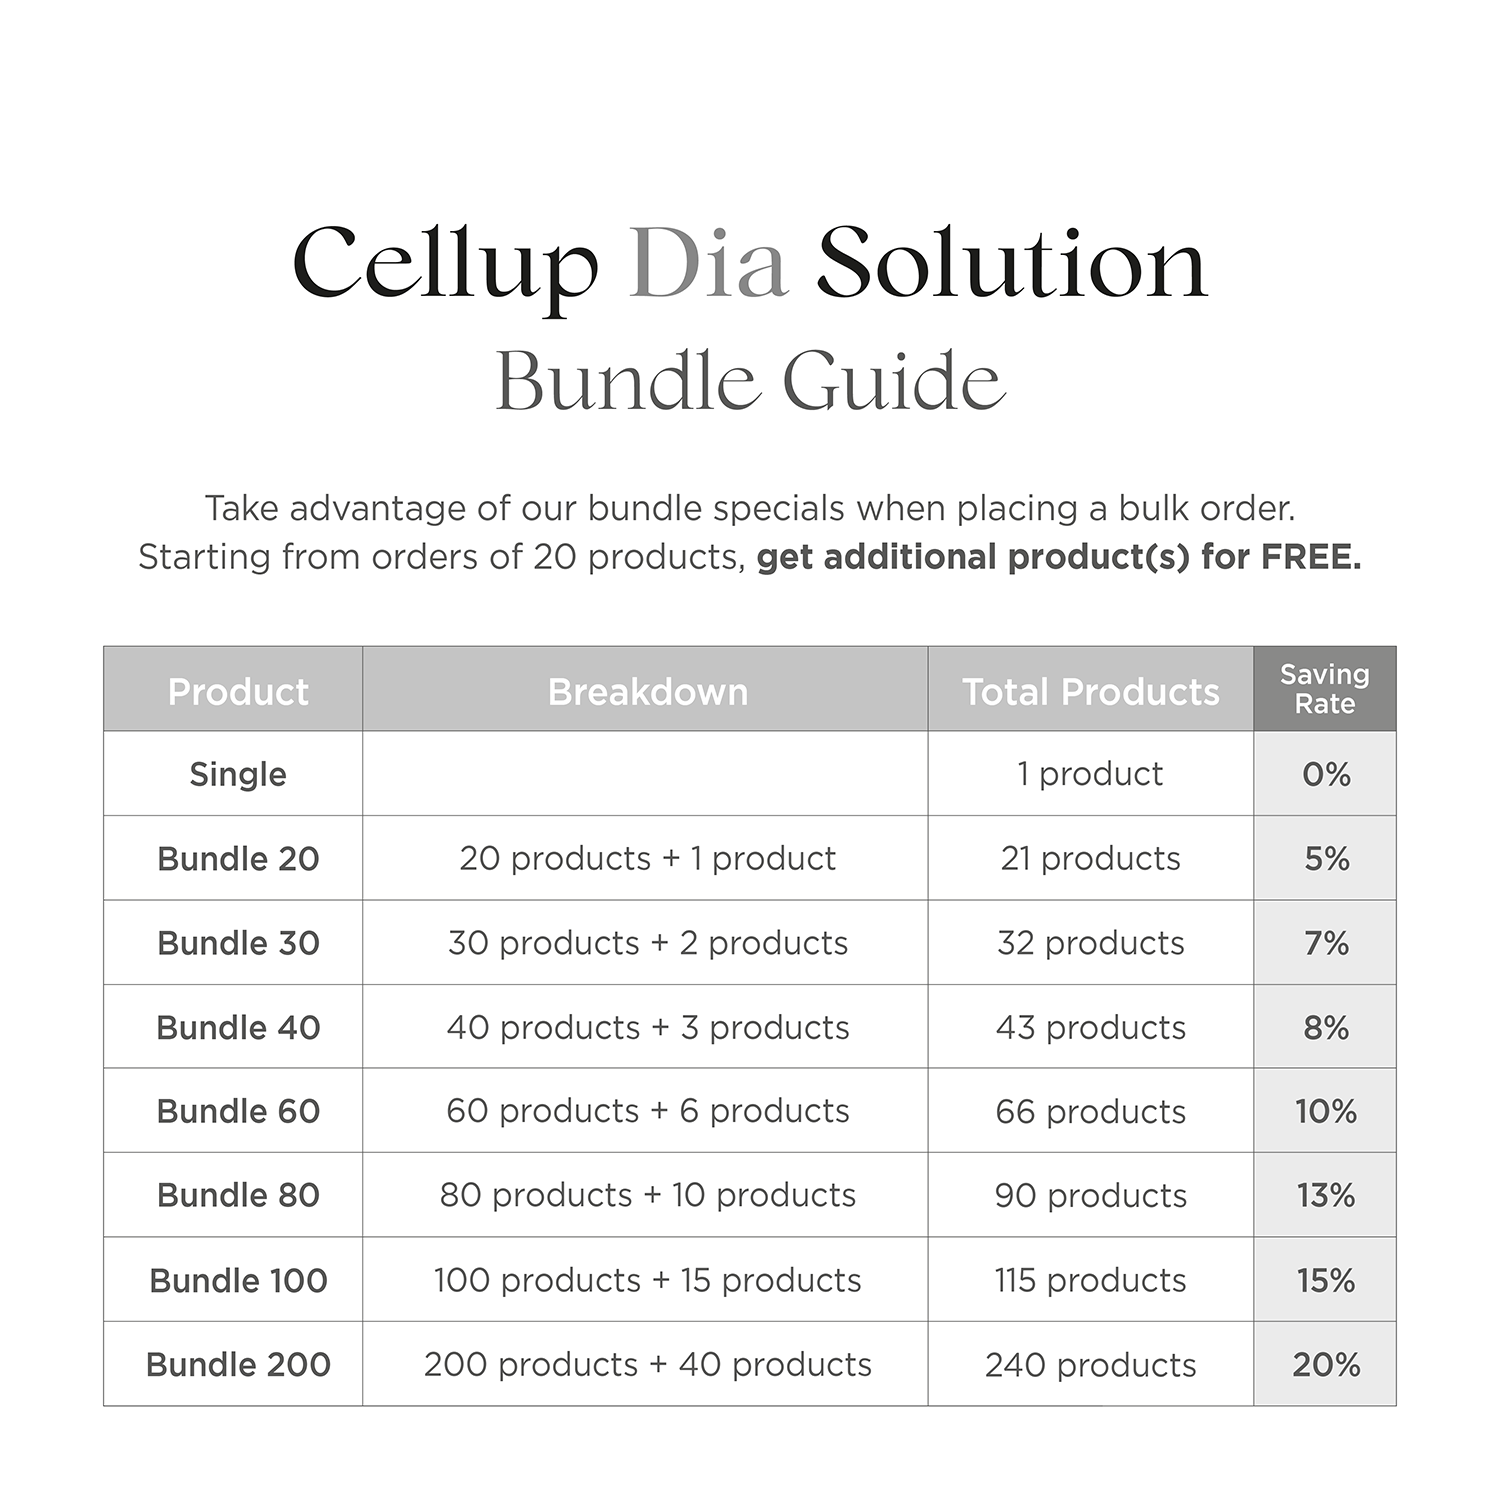 Cellup Dia Solution